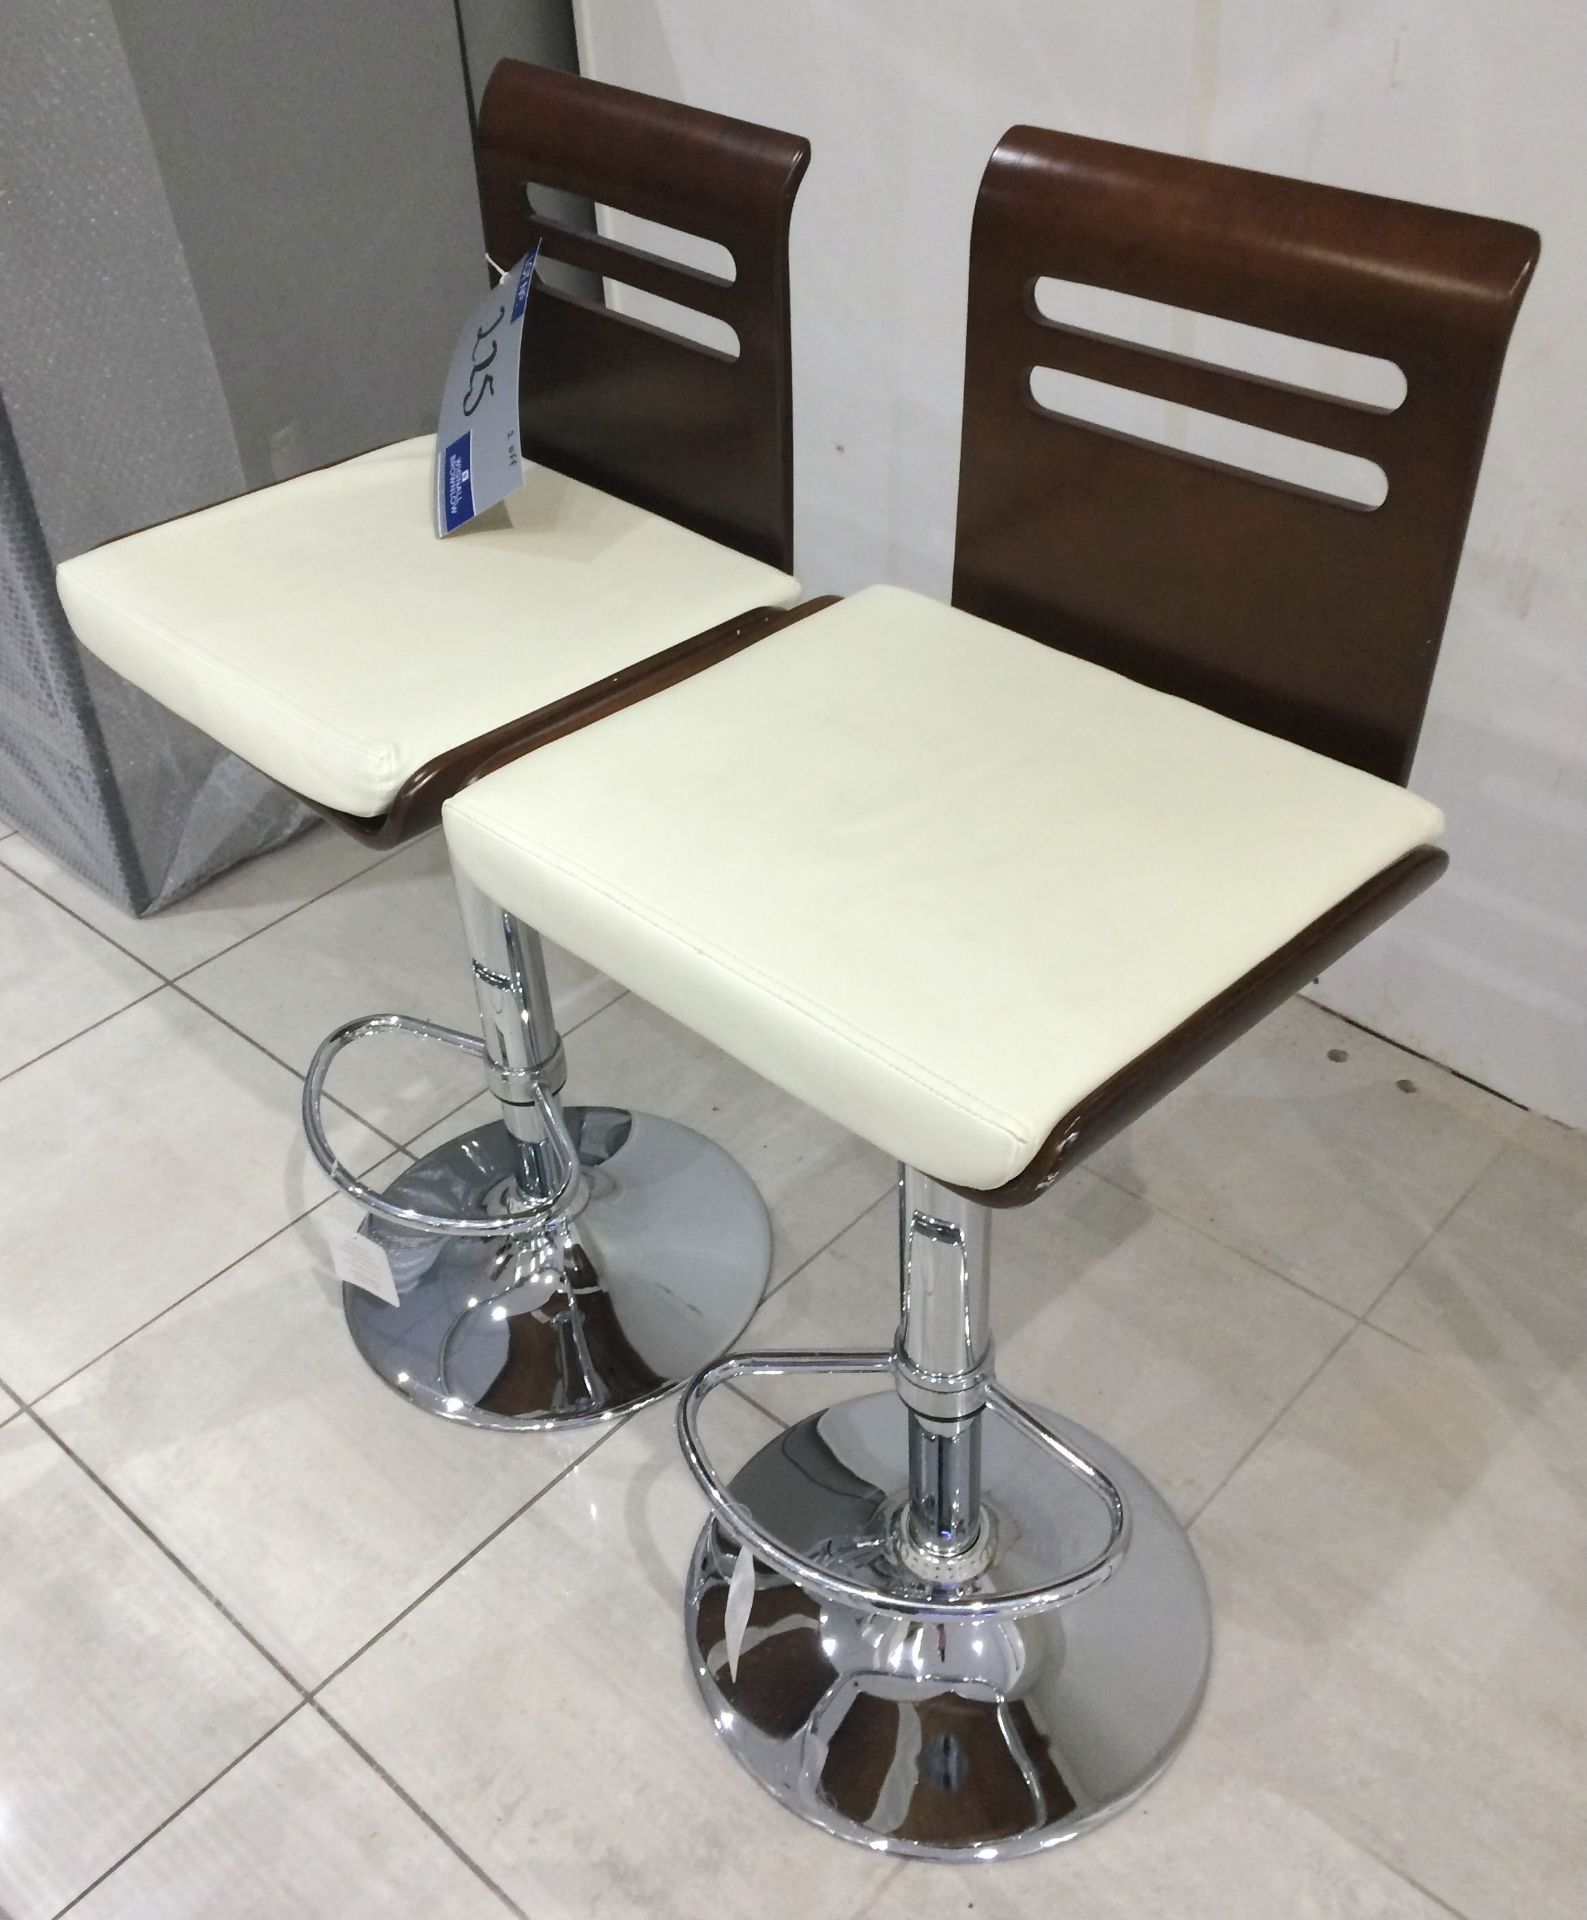 2 Cream Leather and Wood Effect Chrome Base Adjustable Height Bar Chairs.